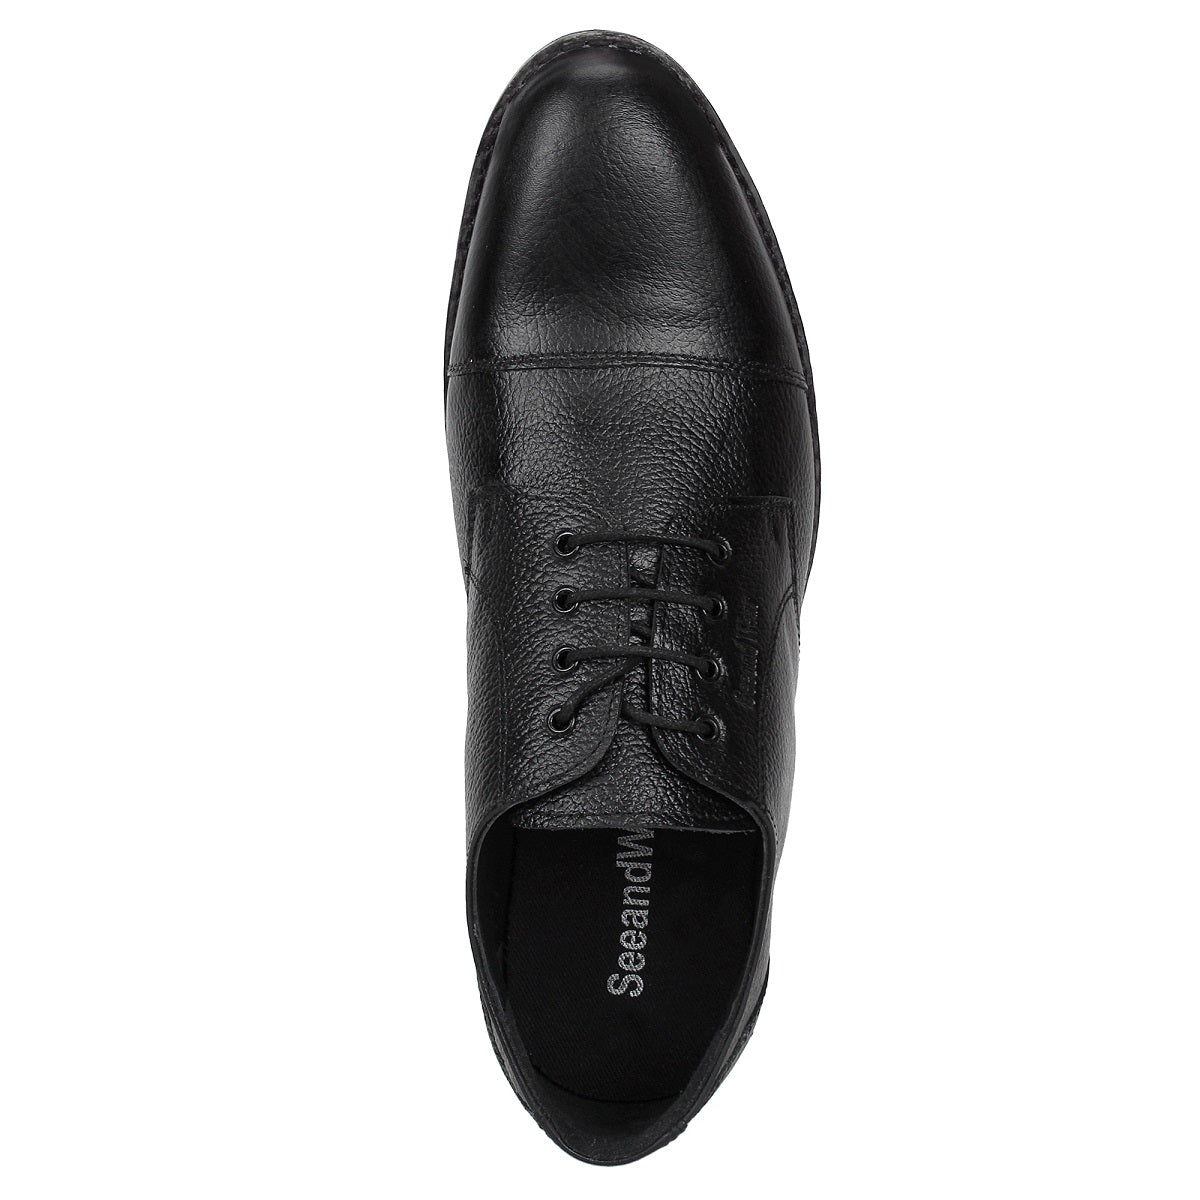 Branded Lace Up Shoes for Men -Used